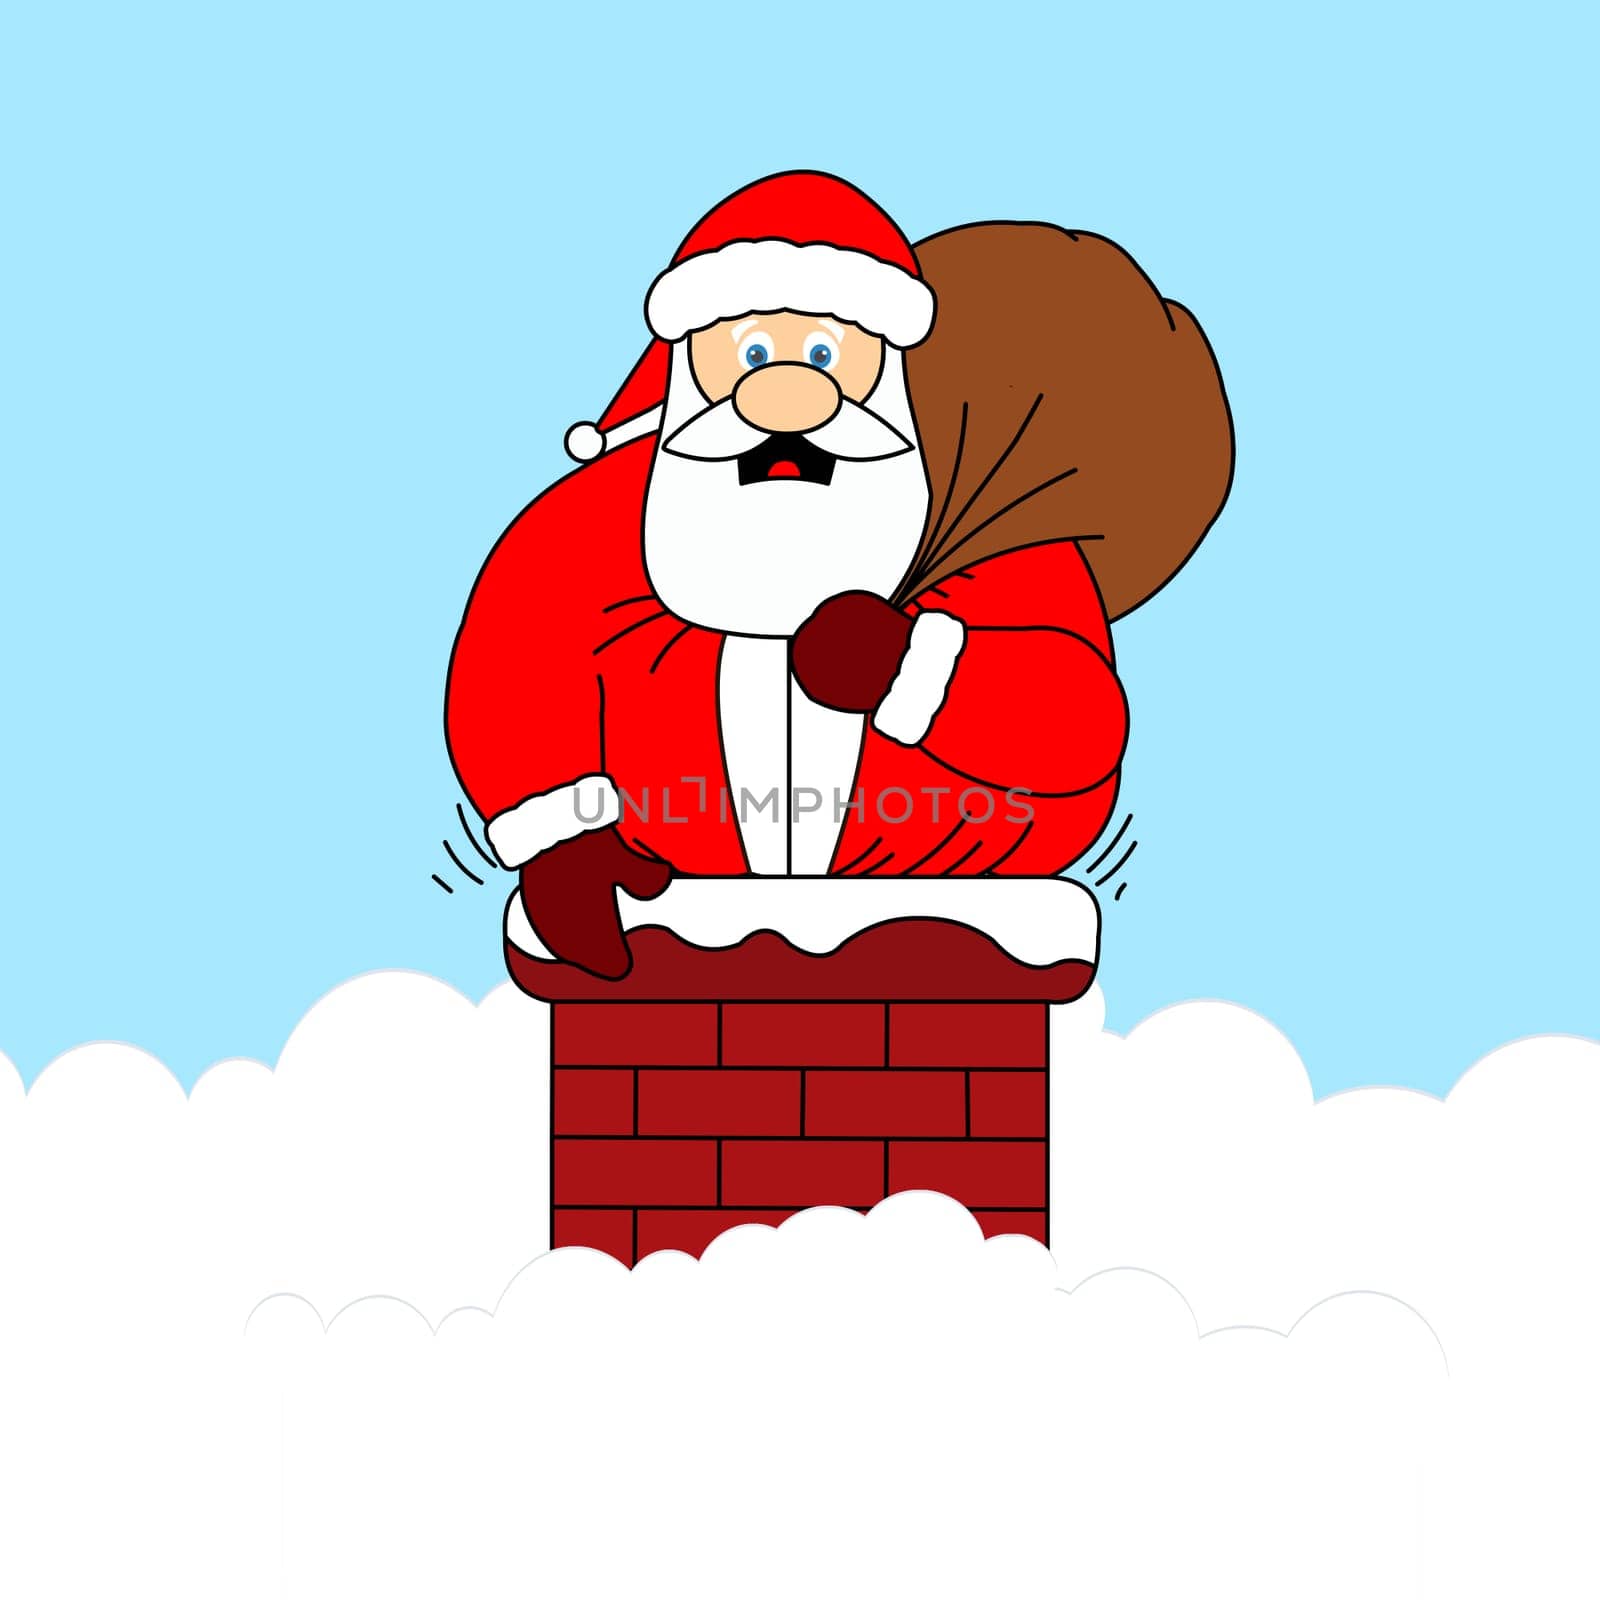 A fat santa stuck in a chimney holding his bag of presents.